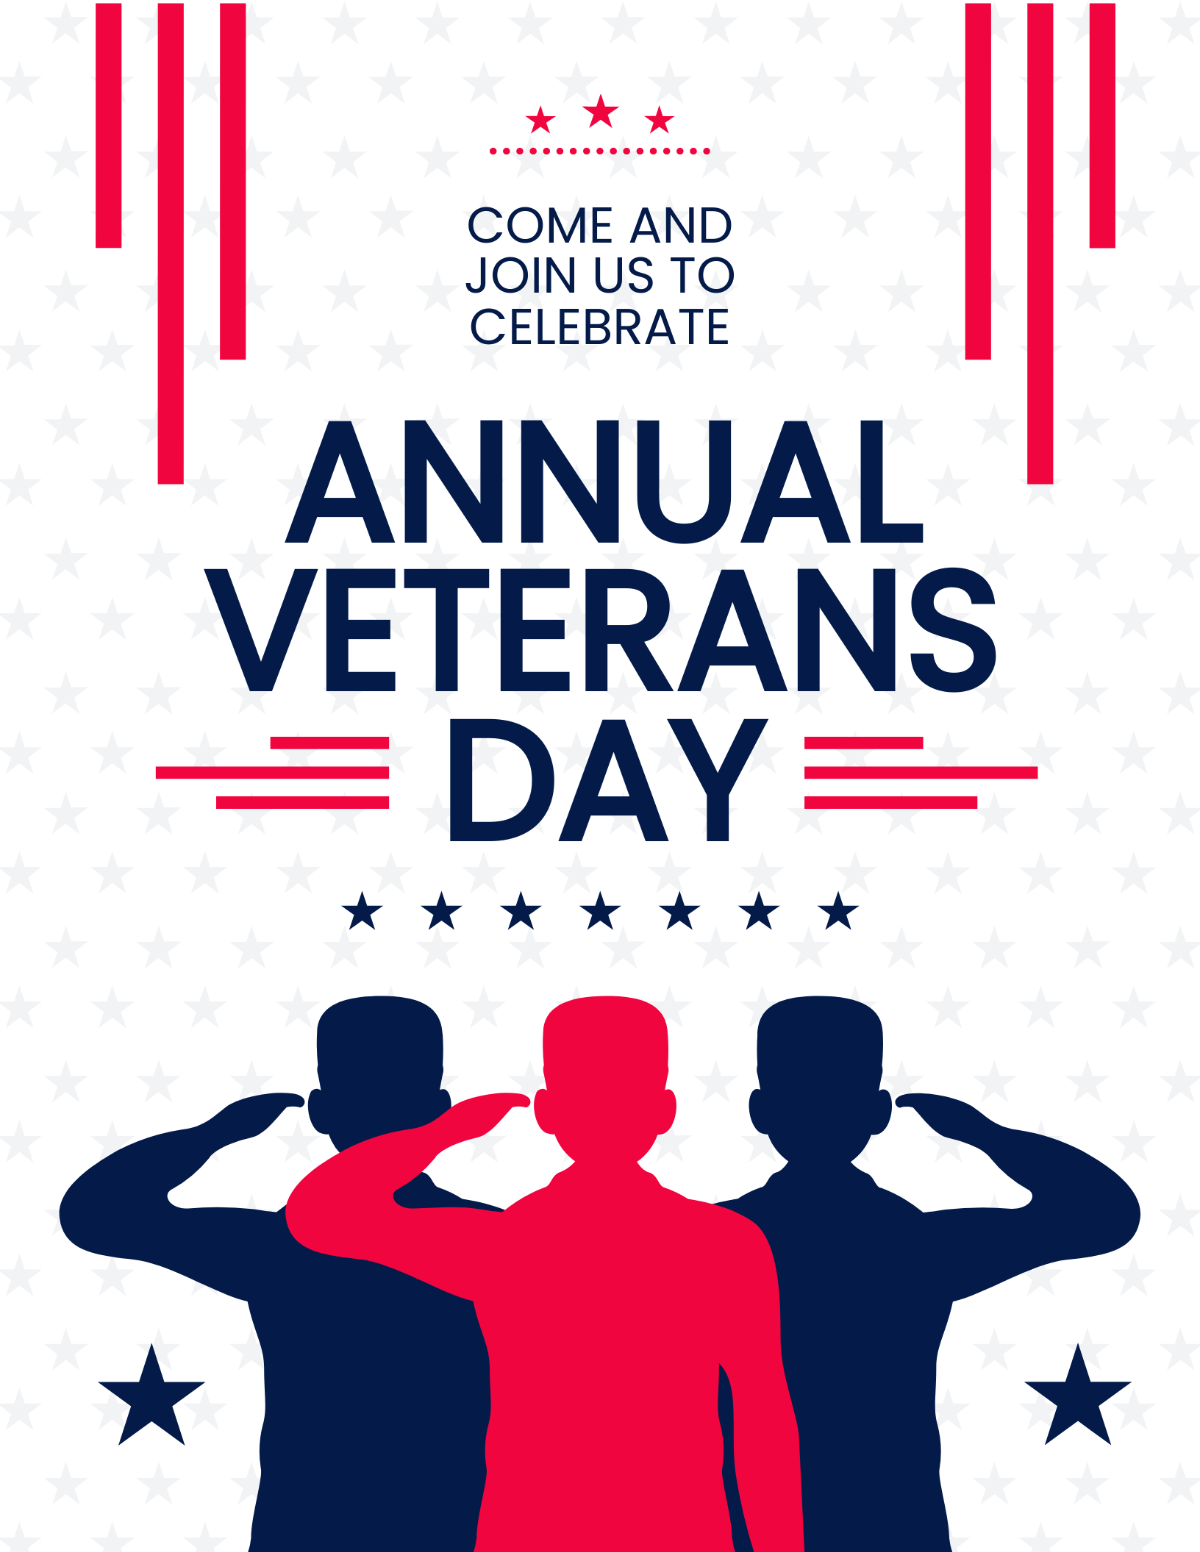 Veterans Day Event Flyer Template